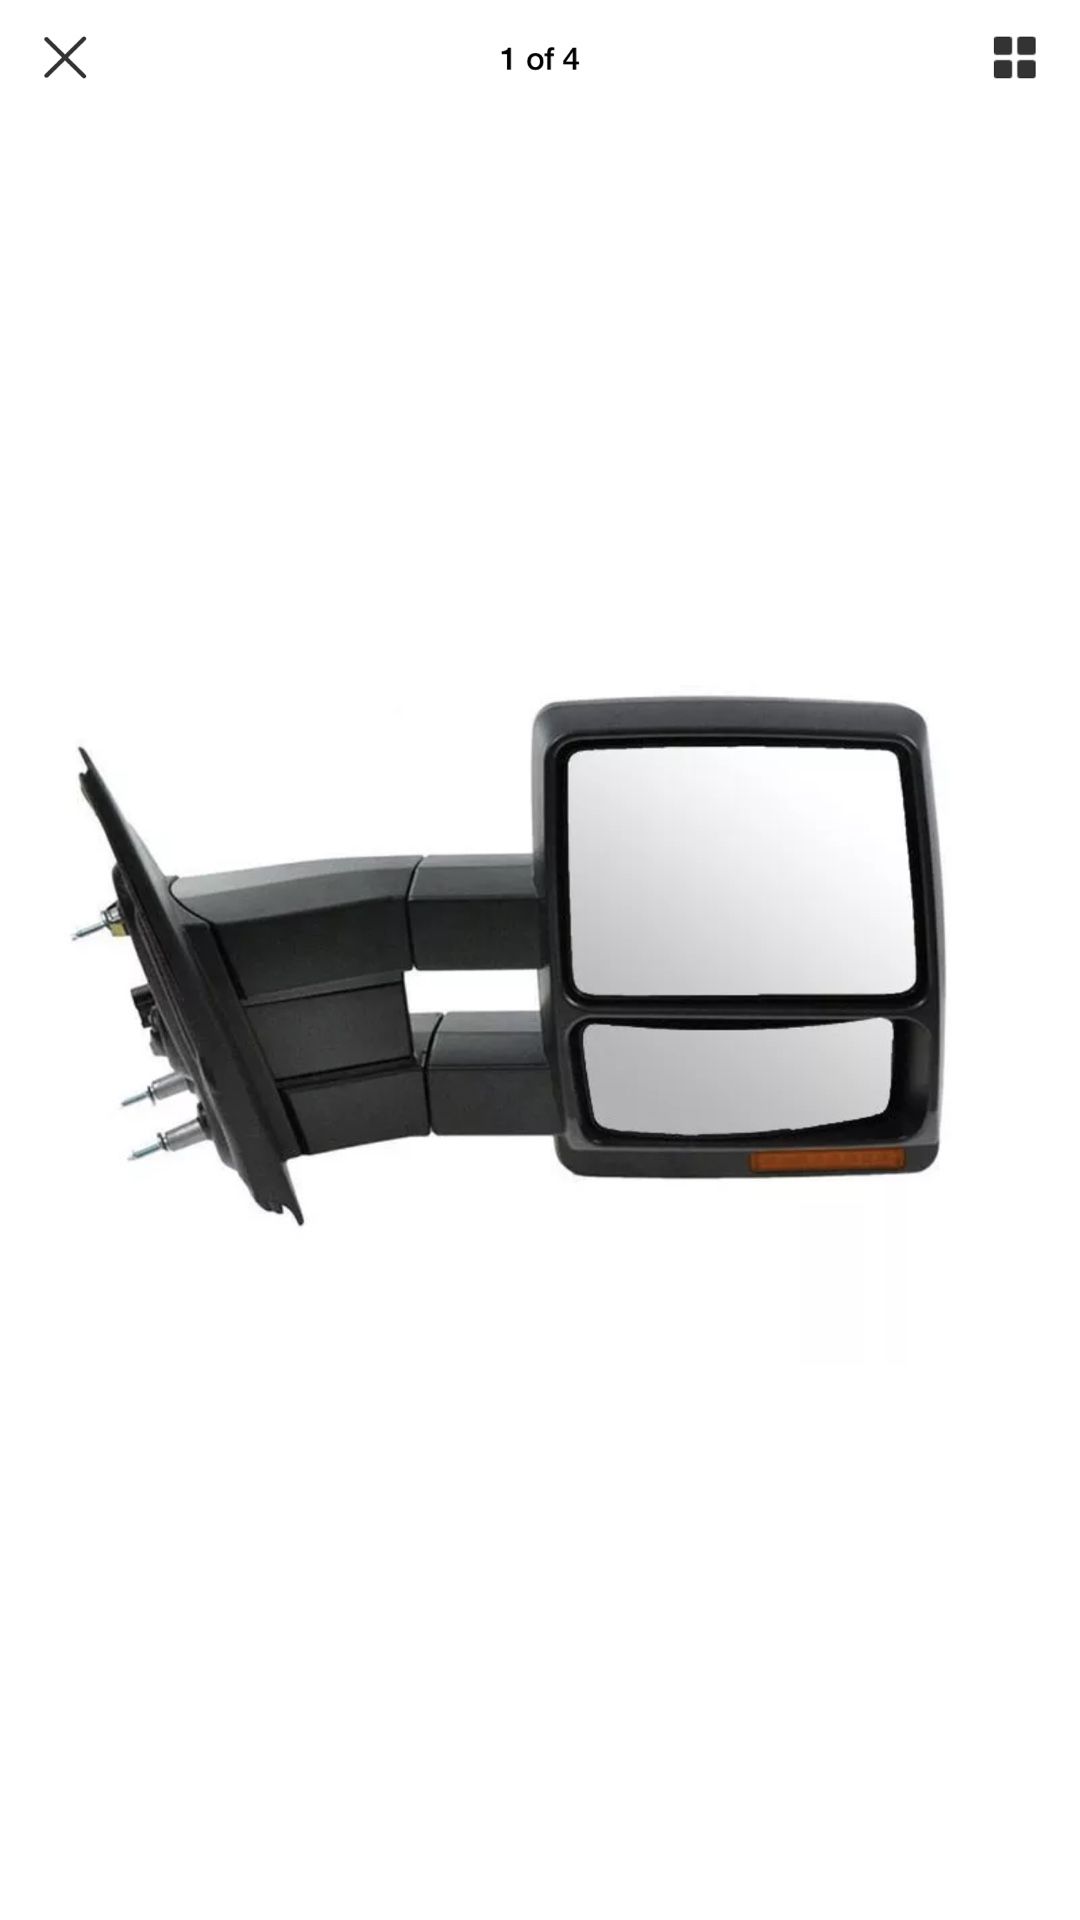 07-14 Ford F-150 tow heated mirror right side